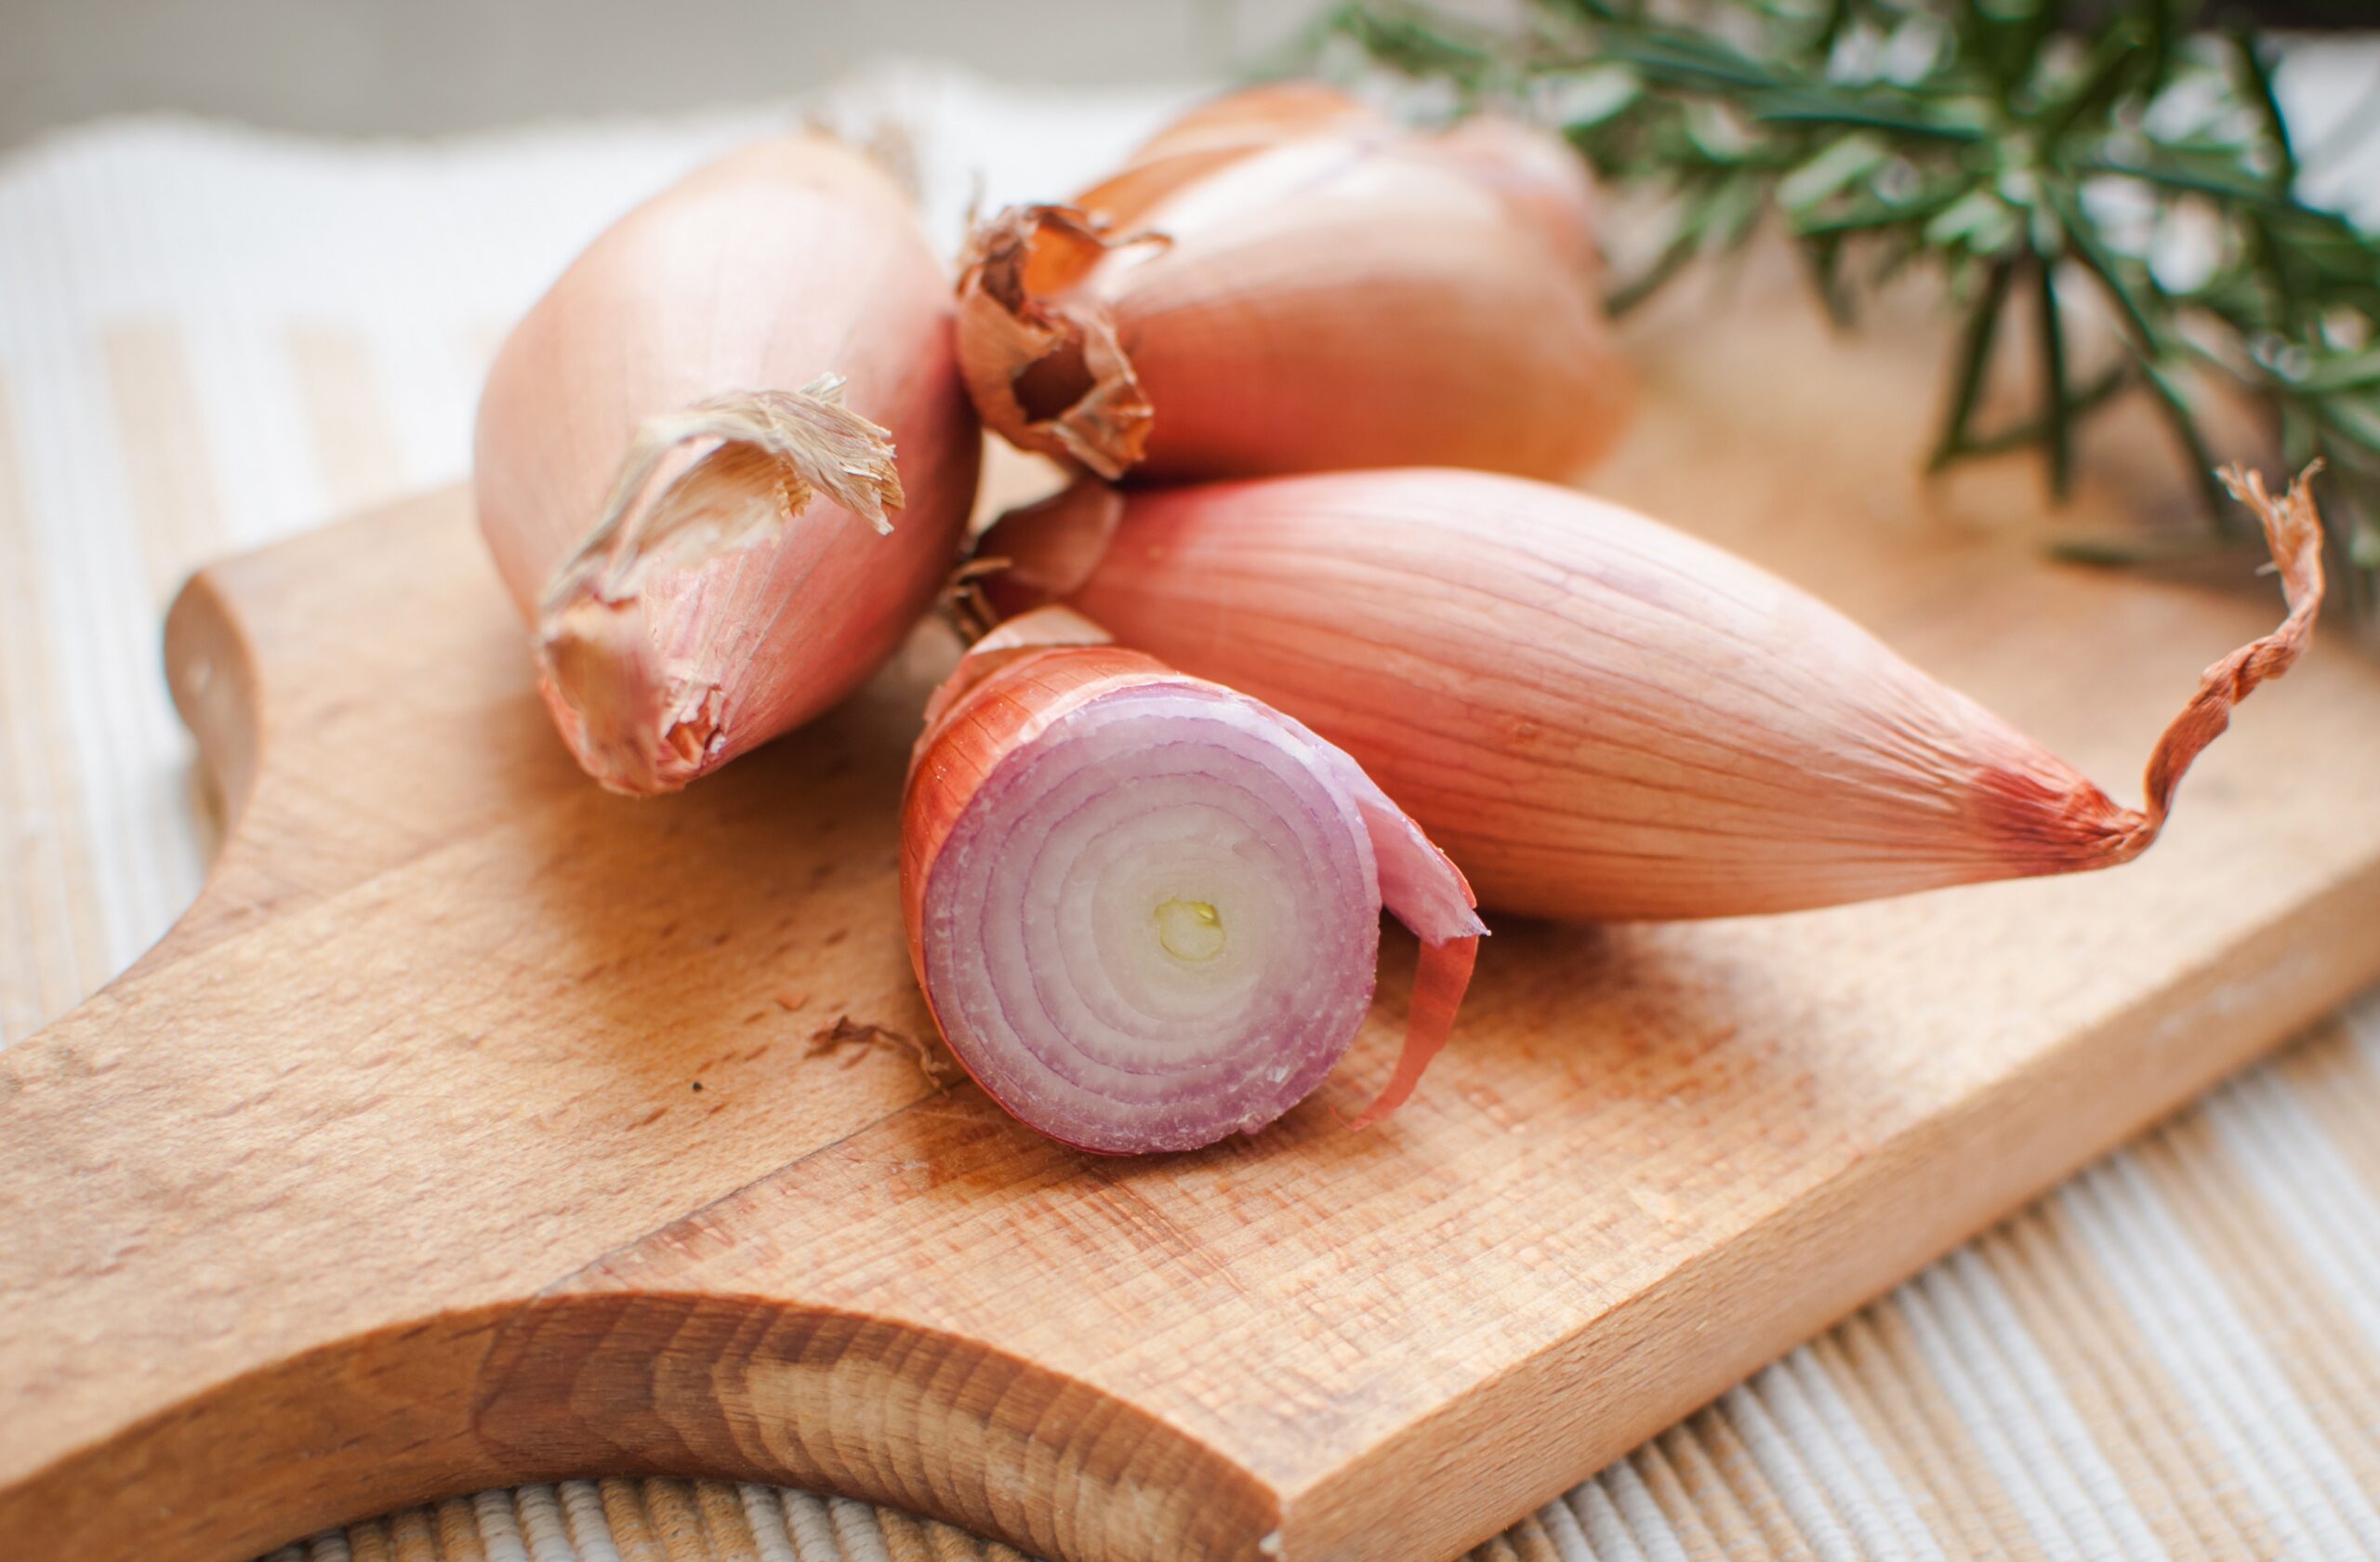 Shallots help against numerous health problems